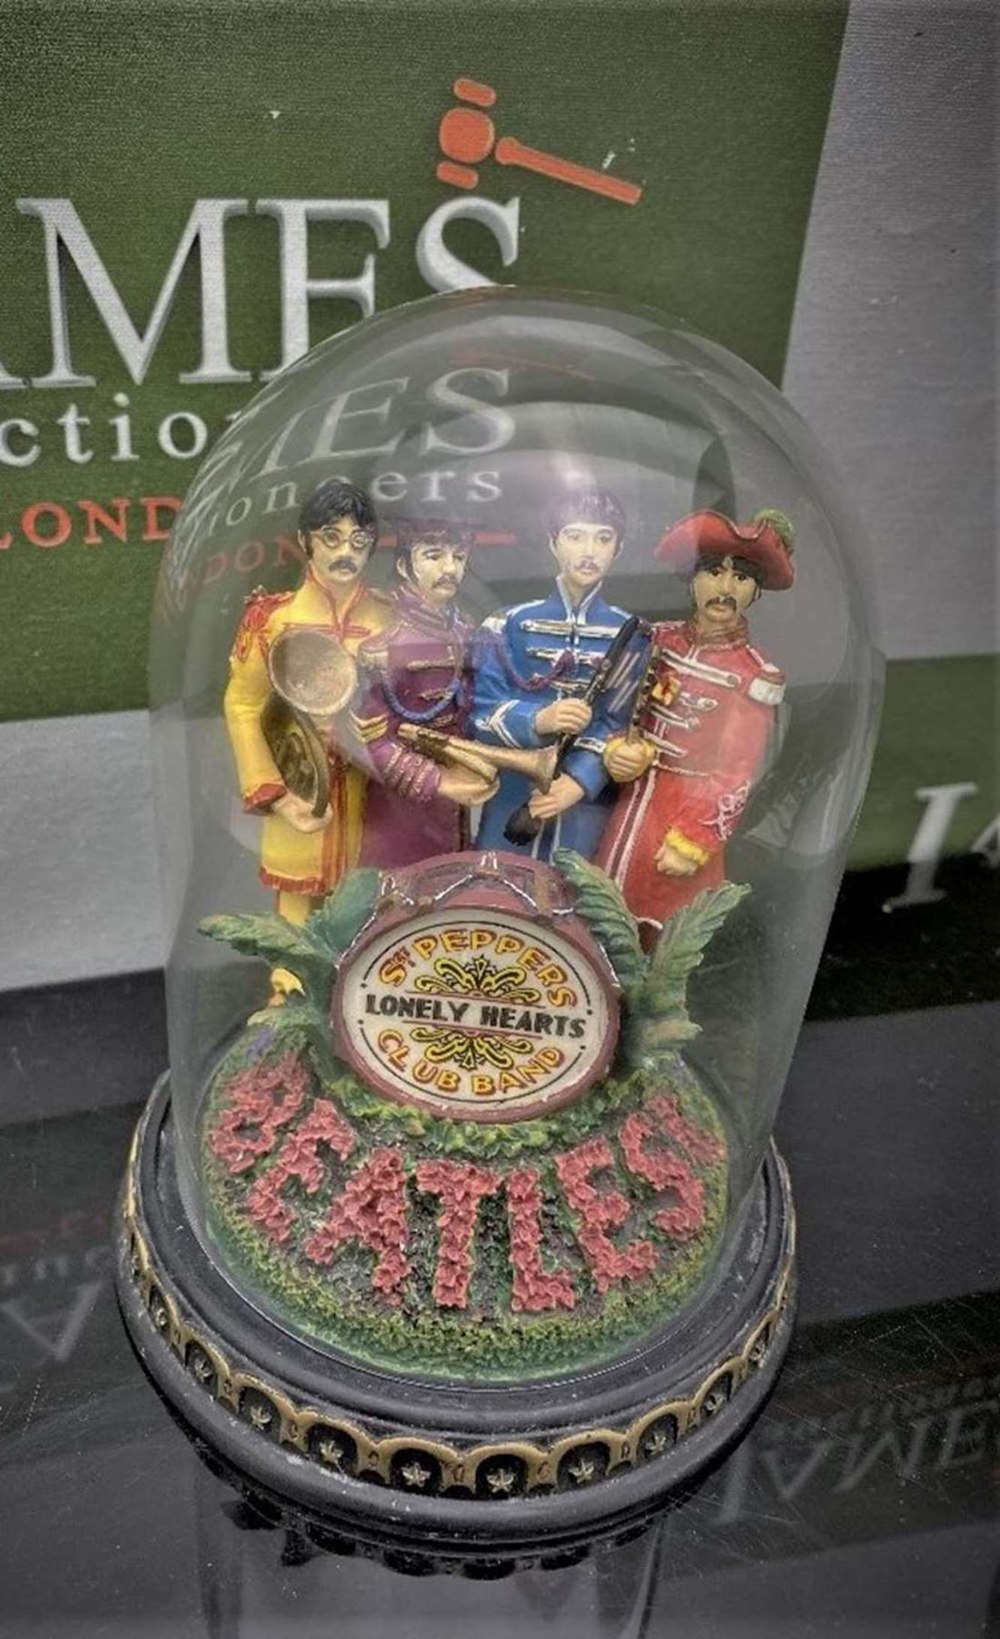 The Beatles ‘Sgt Pepper’s - Franklin Mint ltd Edition -Lonely Hearts Club Band Figural & Glass Dome - Image 3 of 5